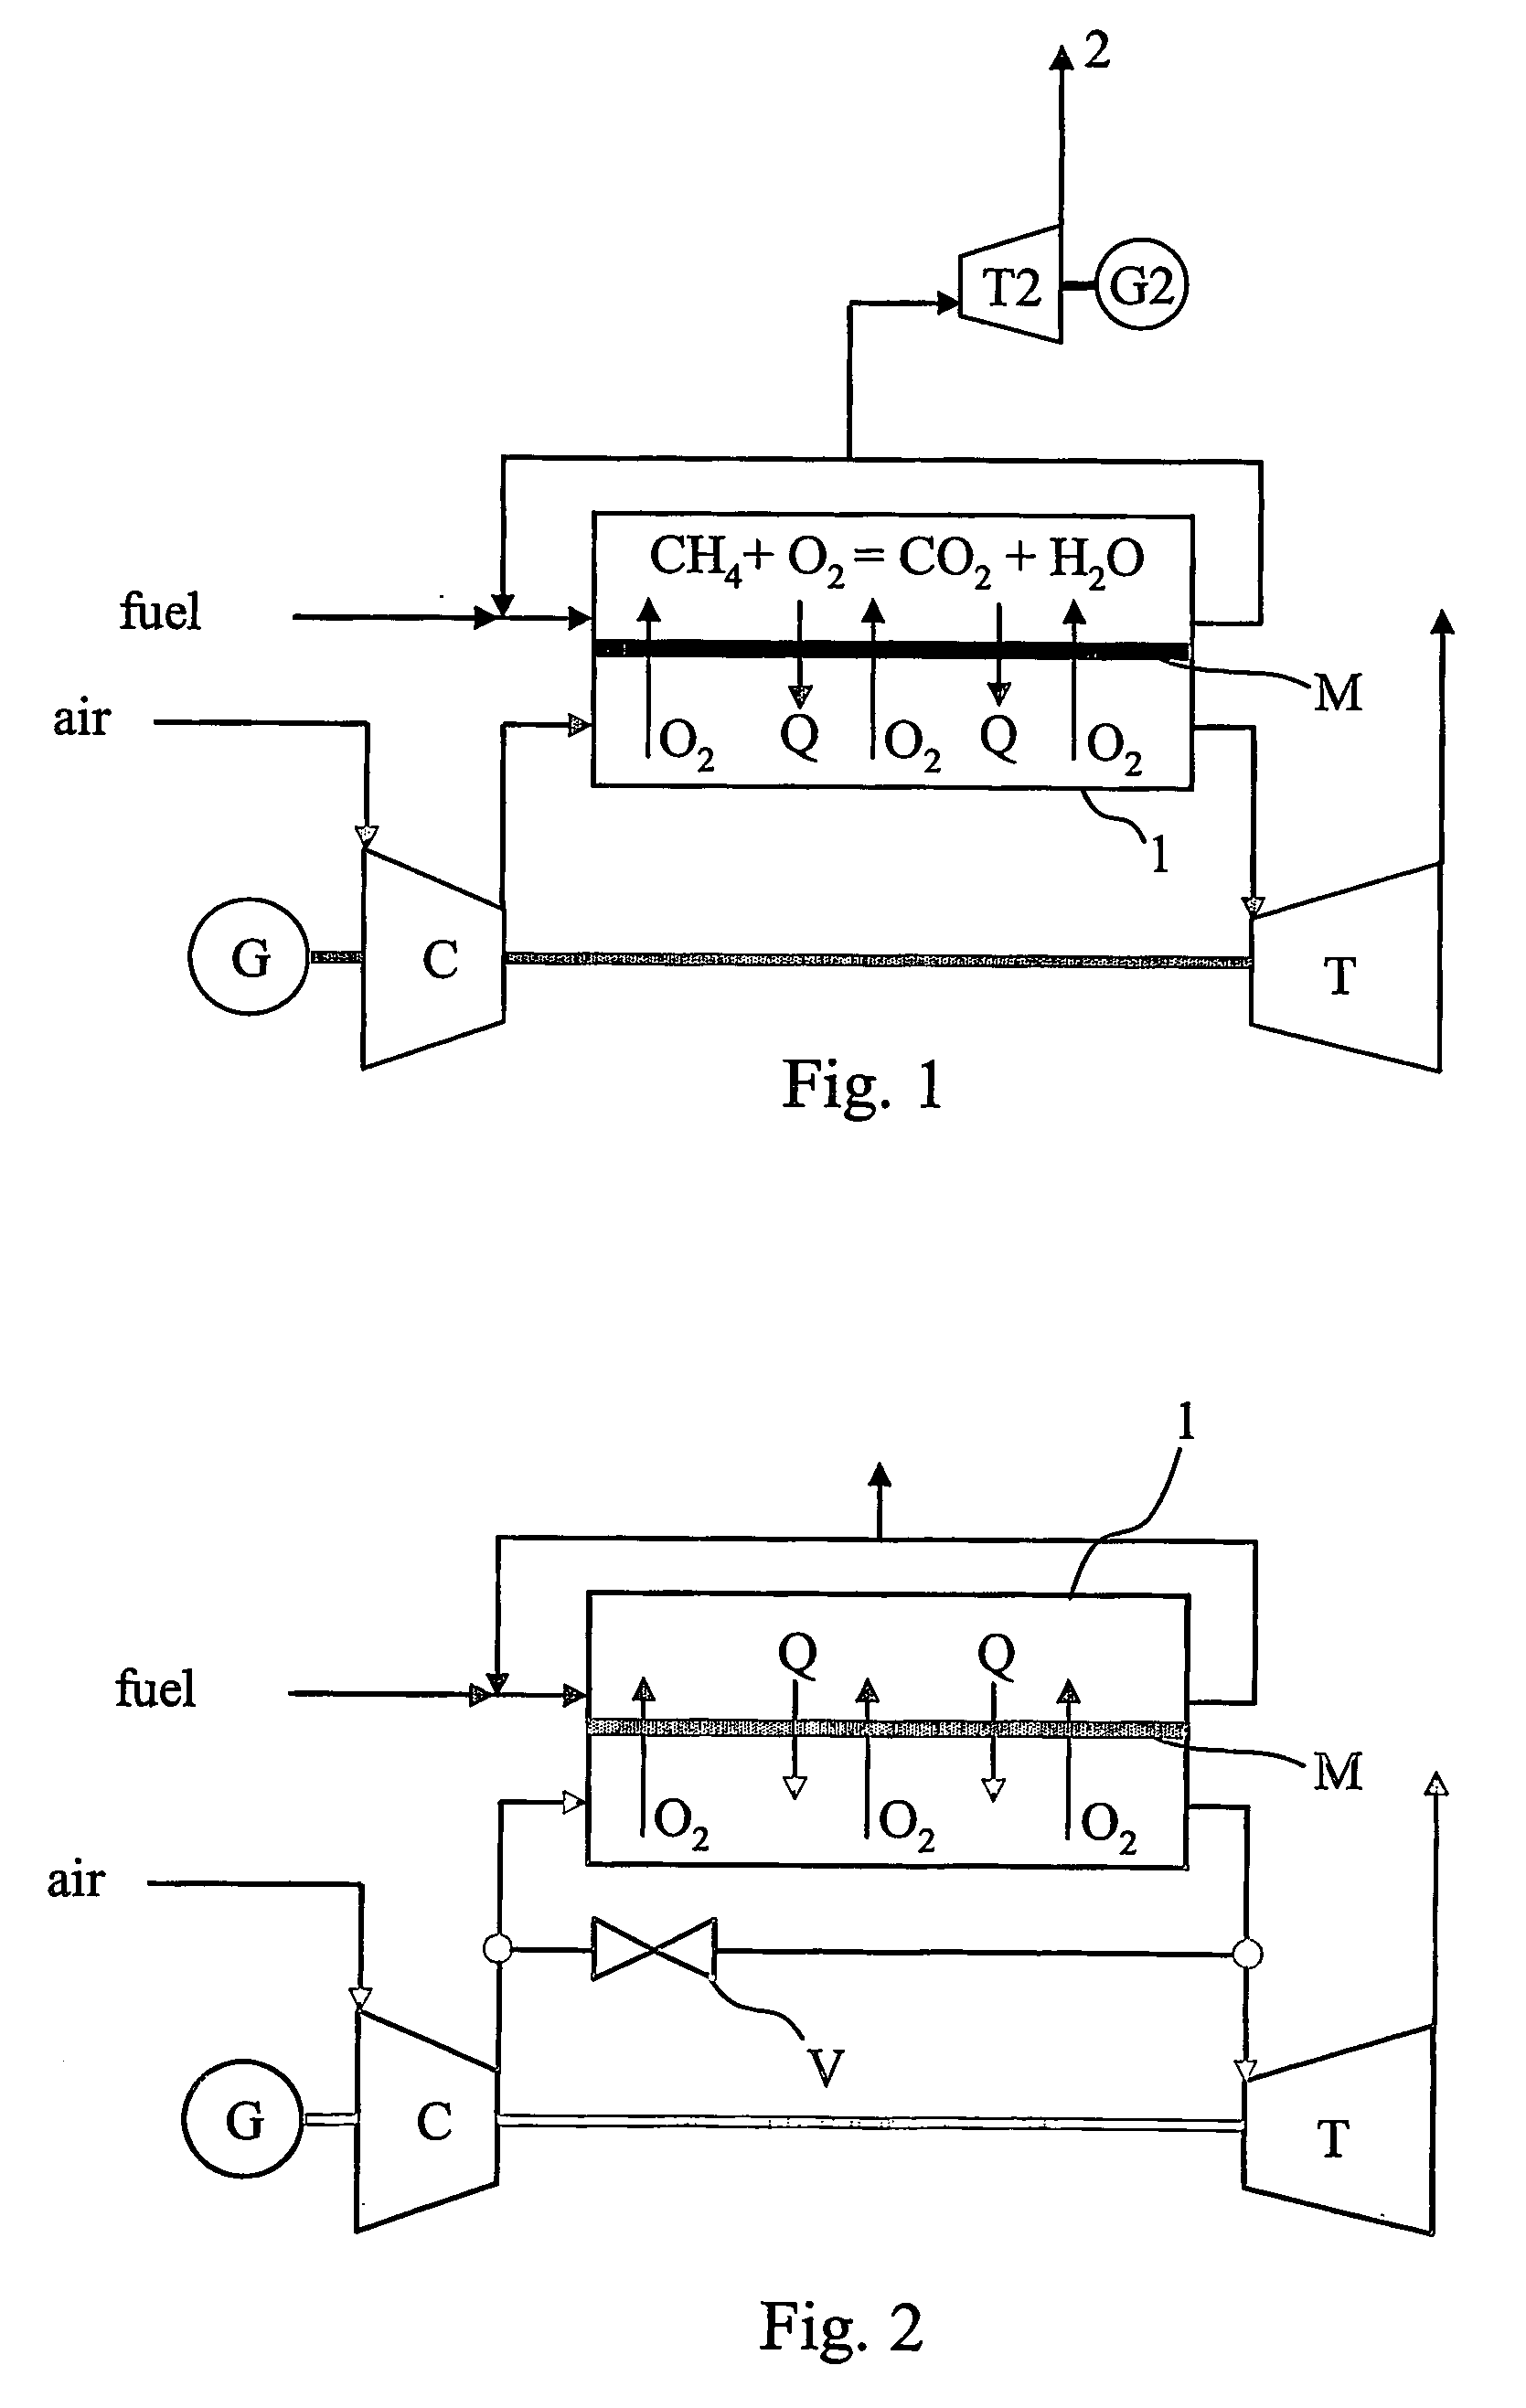 Control of a gas turbine with hot-air reactor